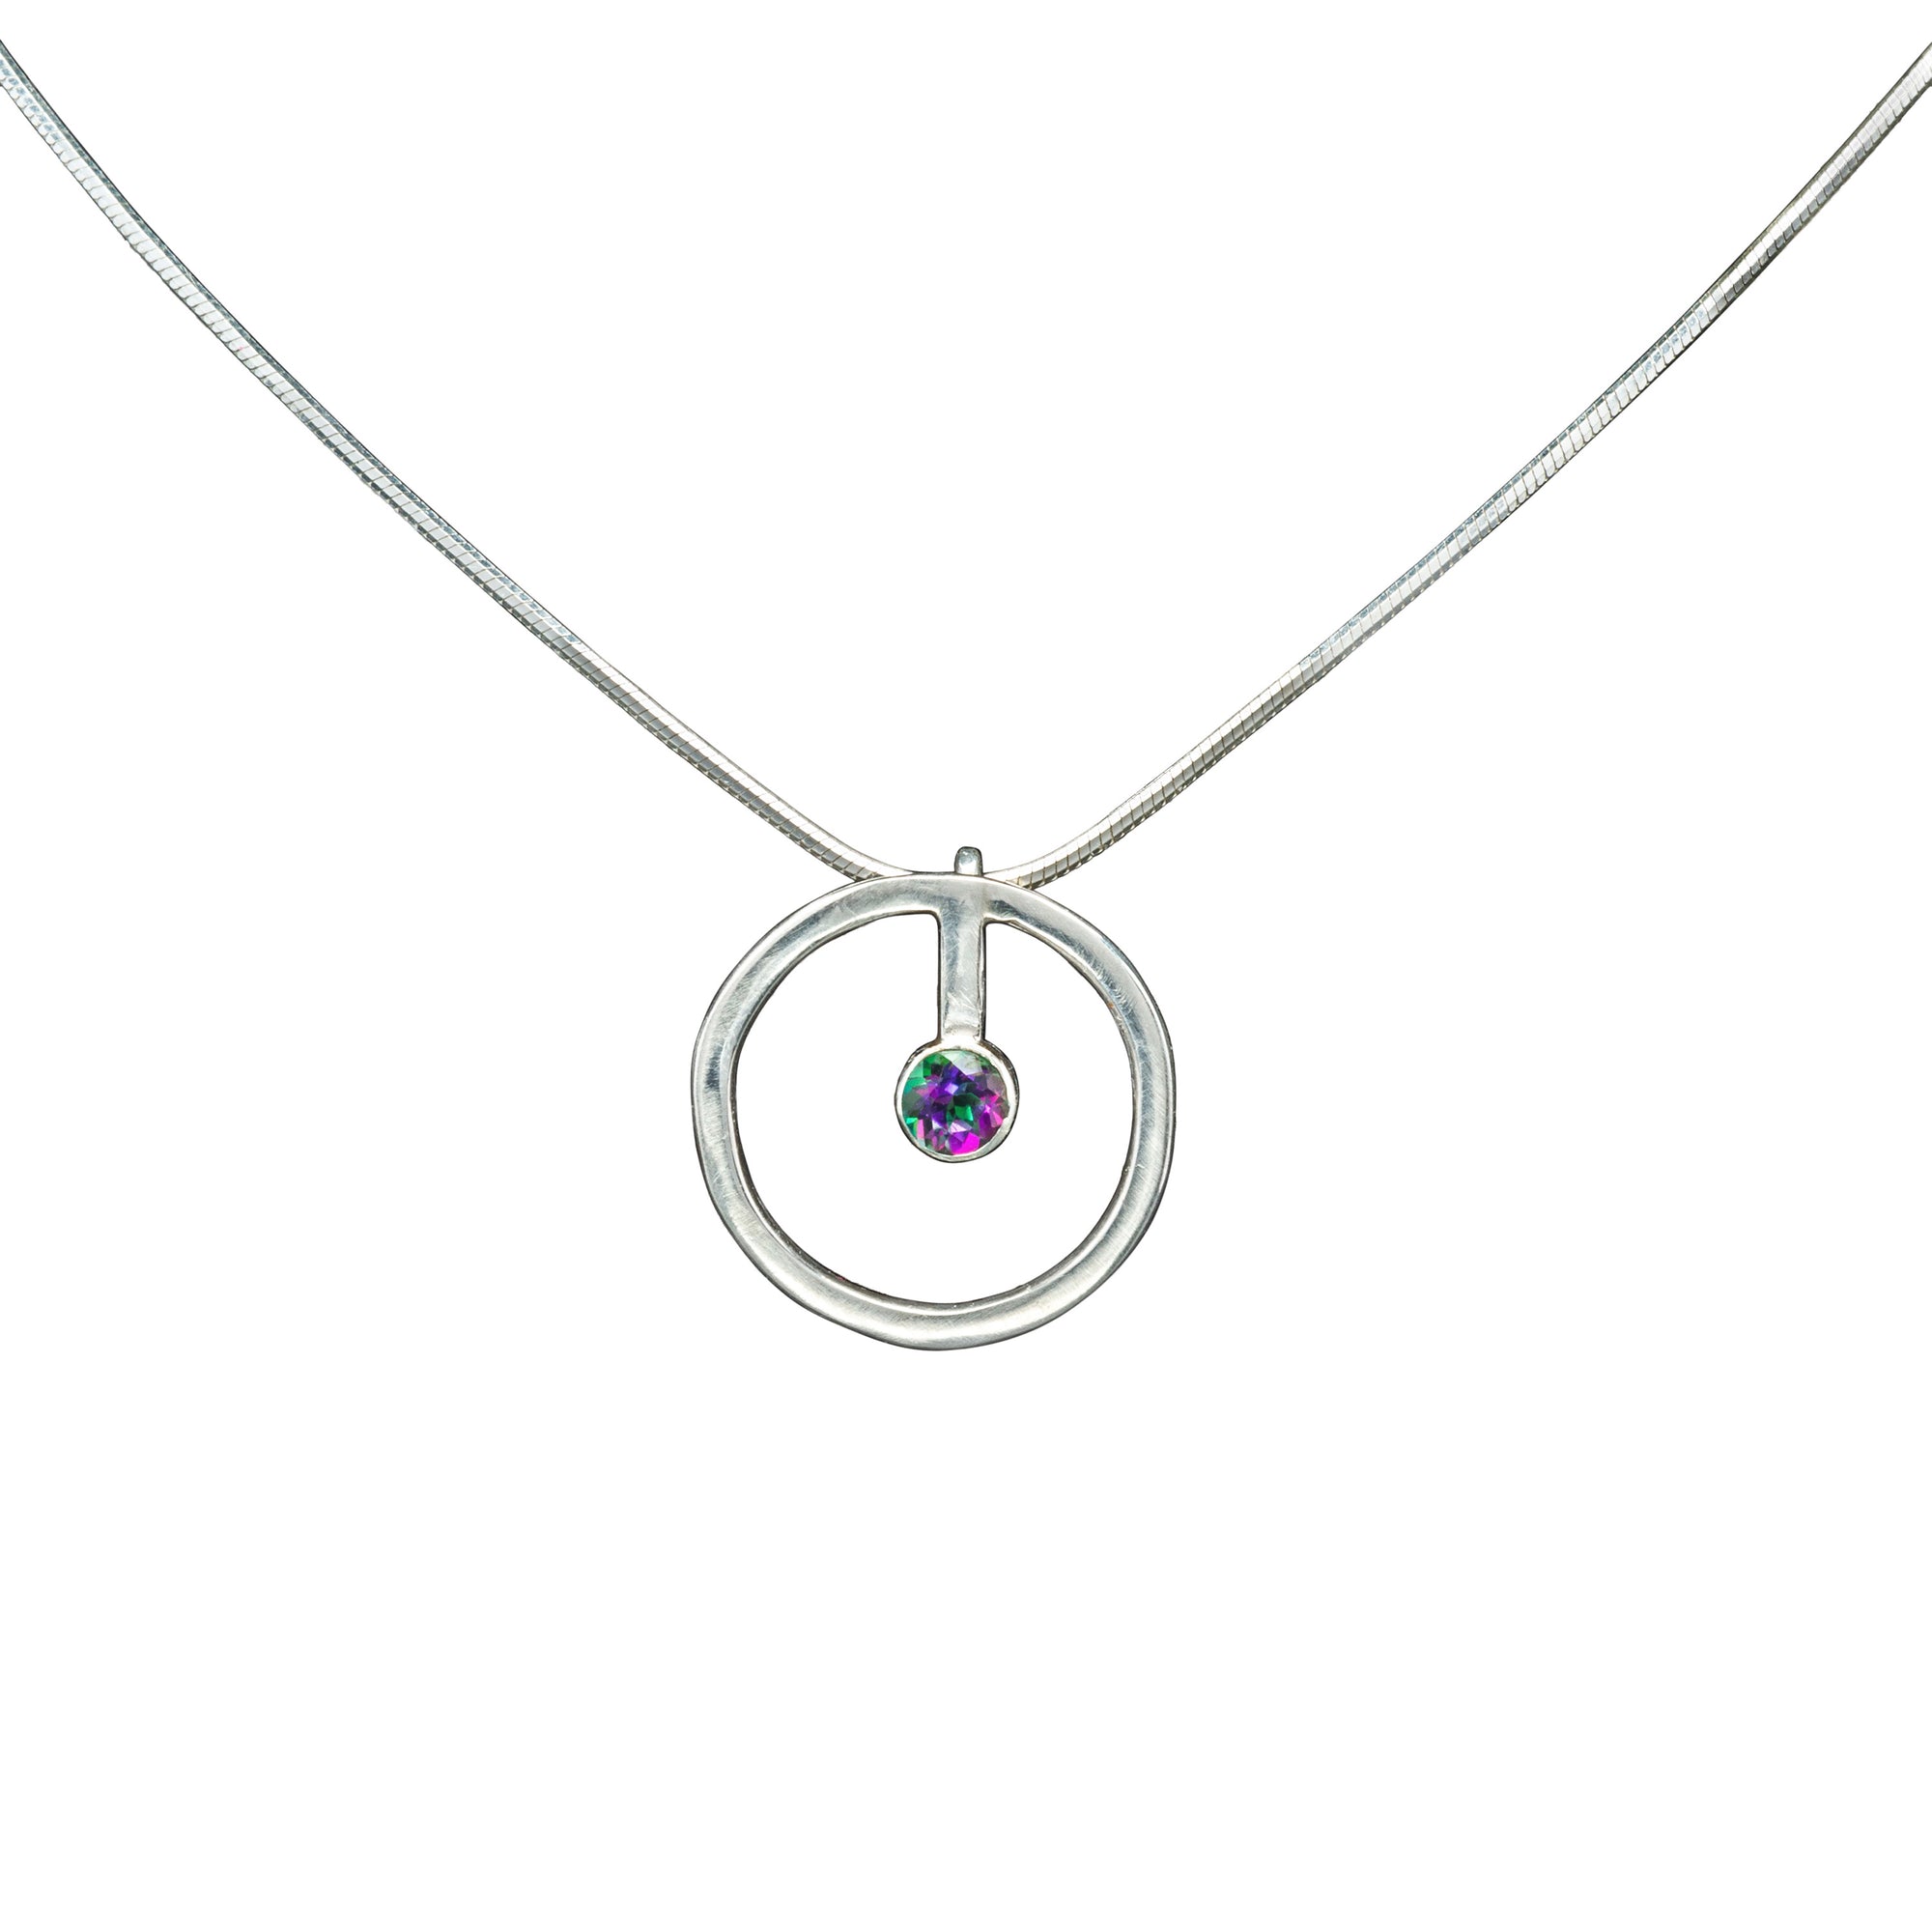 Sterling silver circle necklace with green mystic topaz in a tube bezel